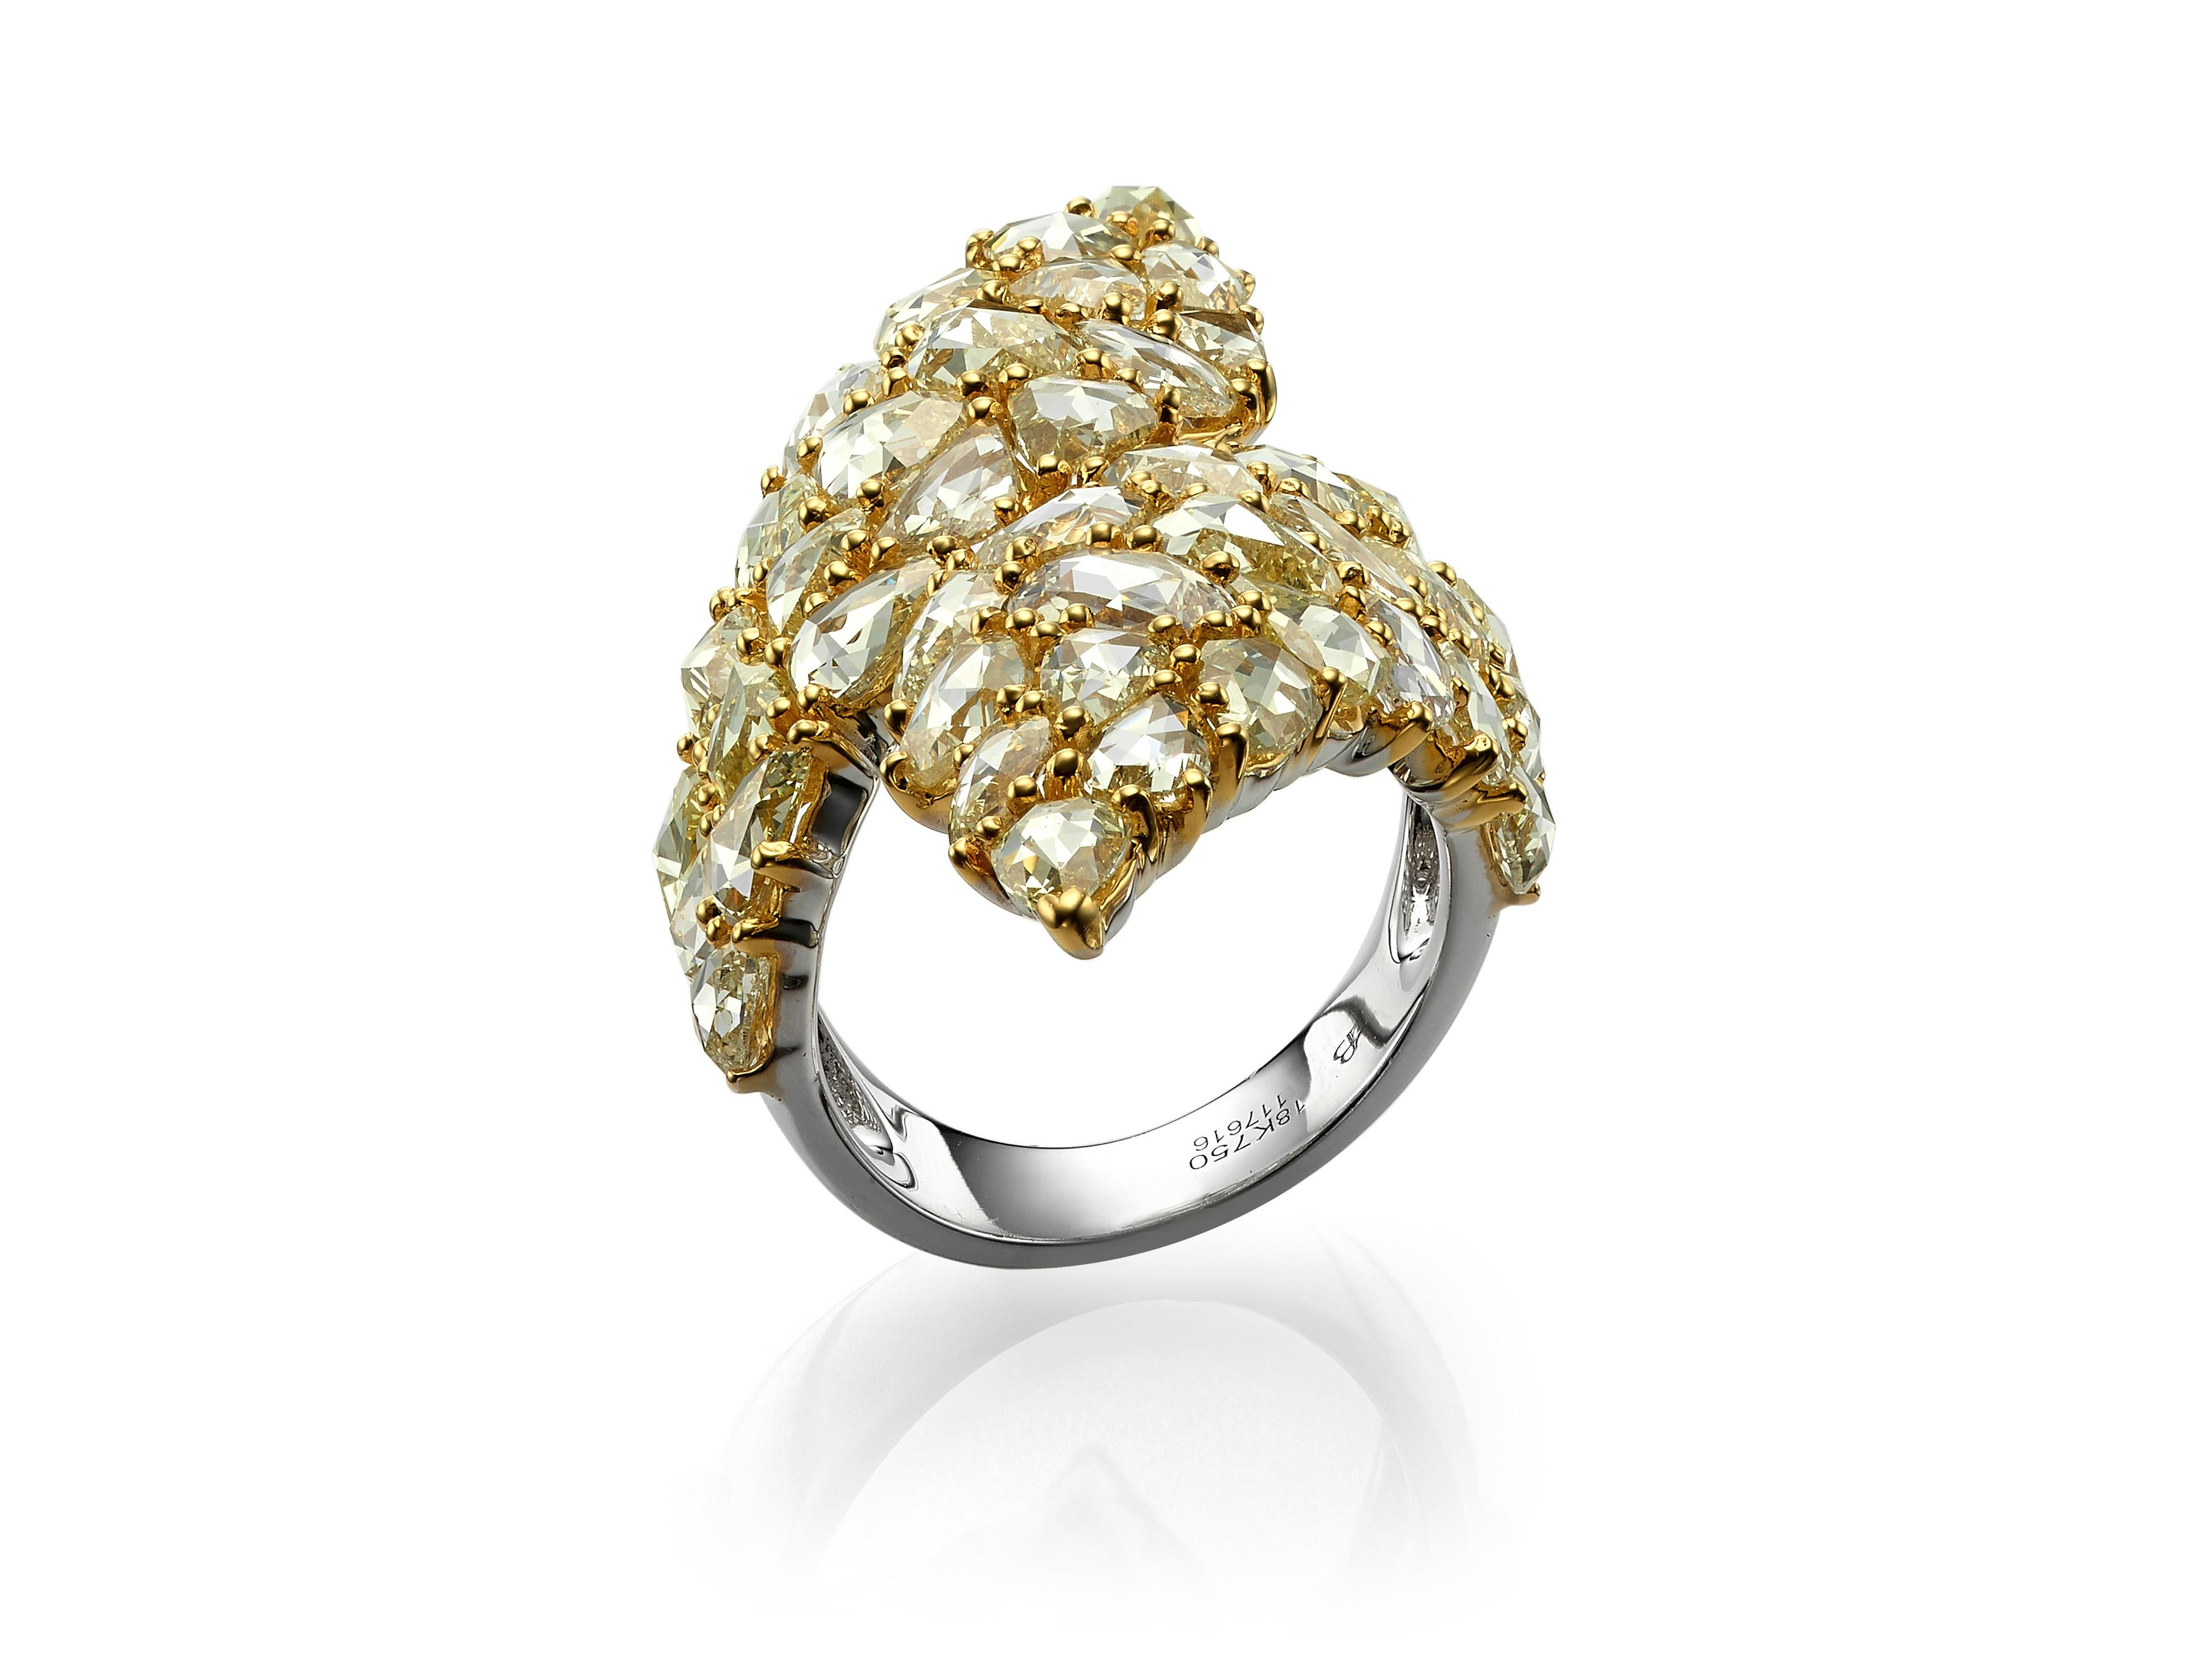 A dramatic cluster of rose cut yellow diamonds set in a 18K yellow gold ring.  Total diamond weight 11.62 carats.  Wear it with the Butani 29.40 Carat Rose Cut Yellow Diamond 18 Karat Yellow Gold Earrings.
Currently a ring size US 7.  For other